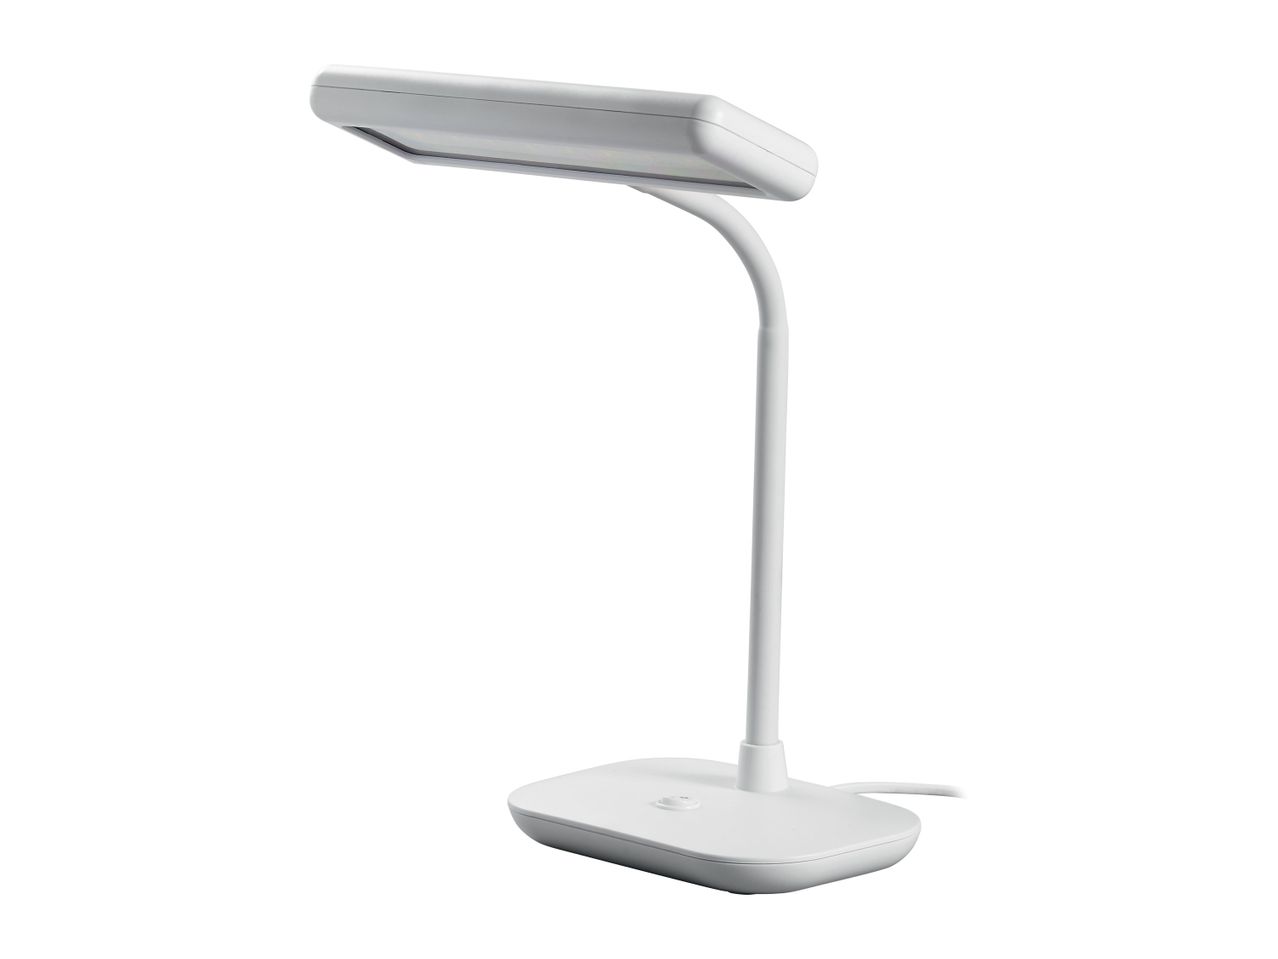 Go to full screen view: Livarno Home LED Daylight Lamp - Image 6